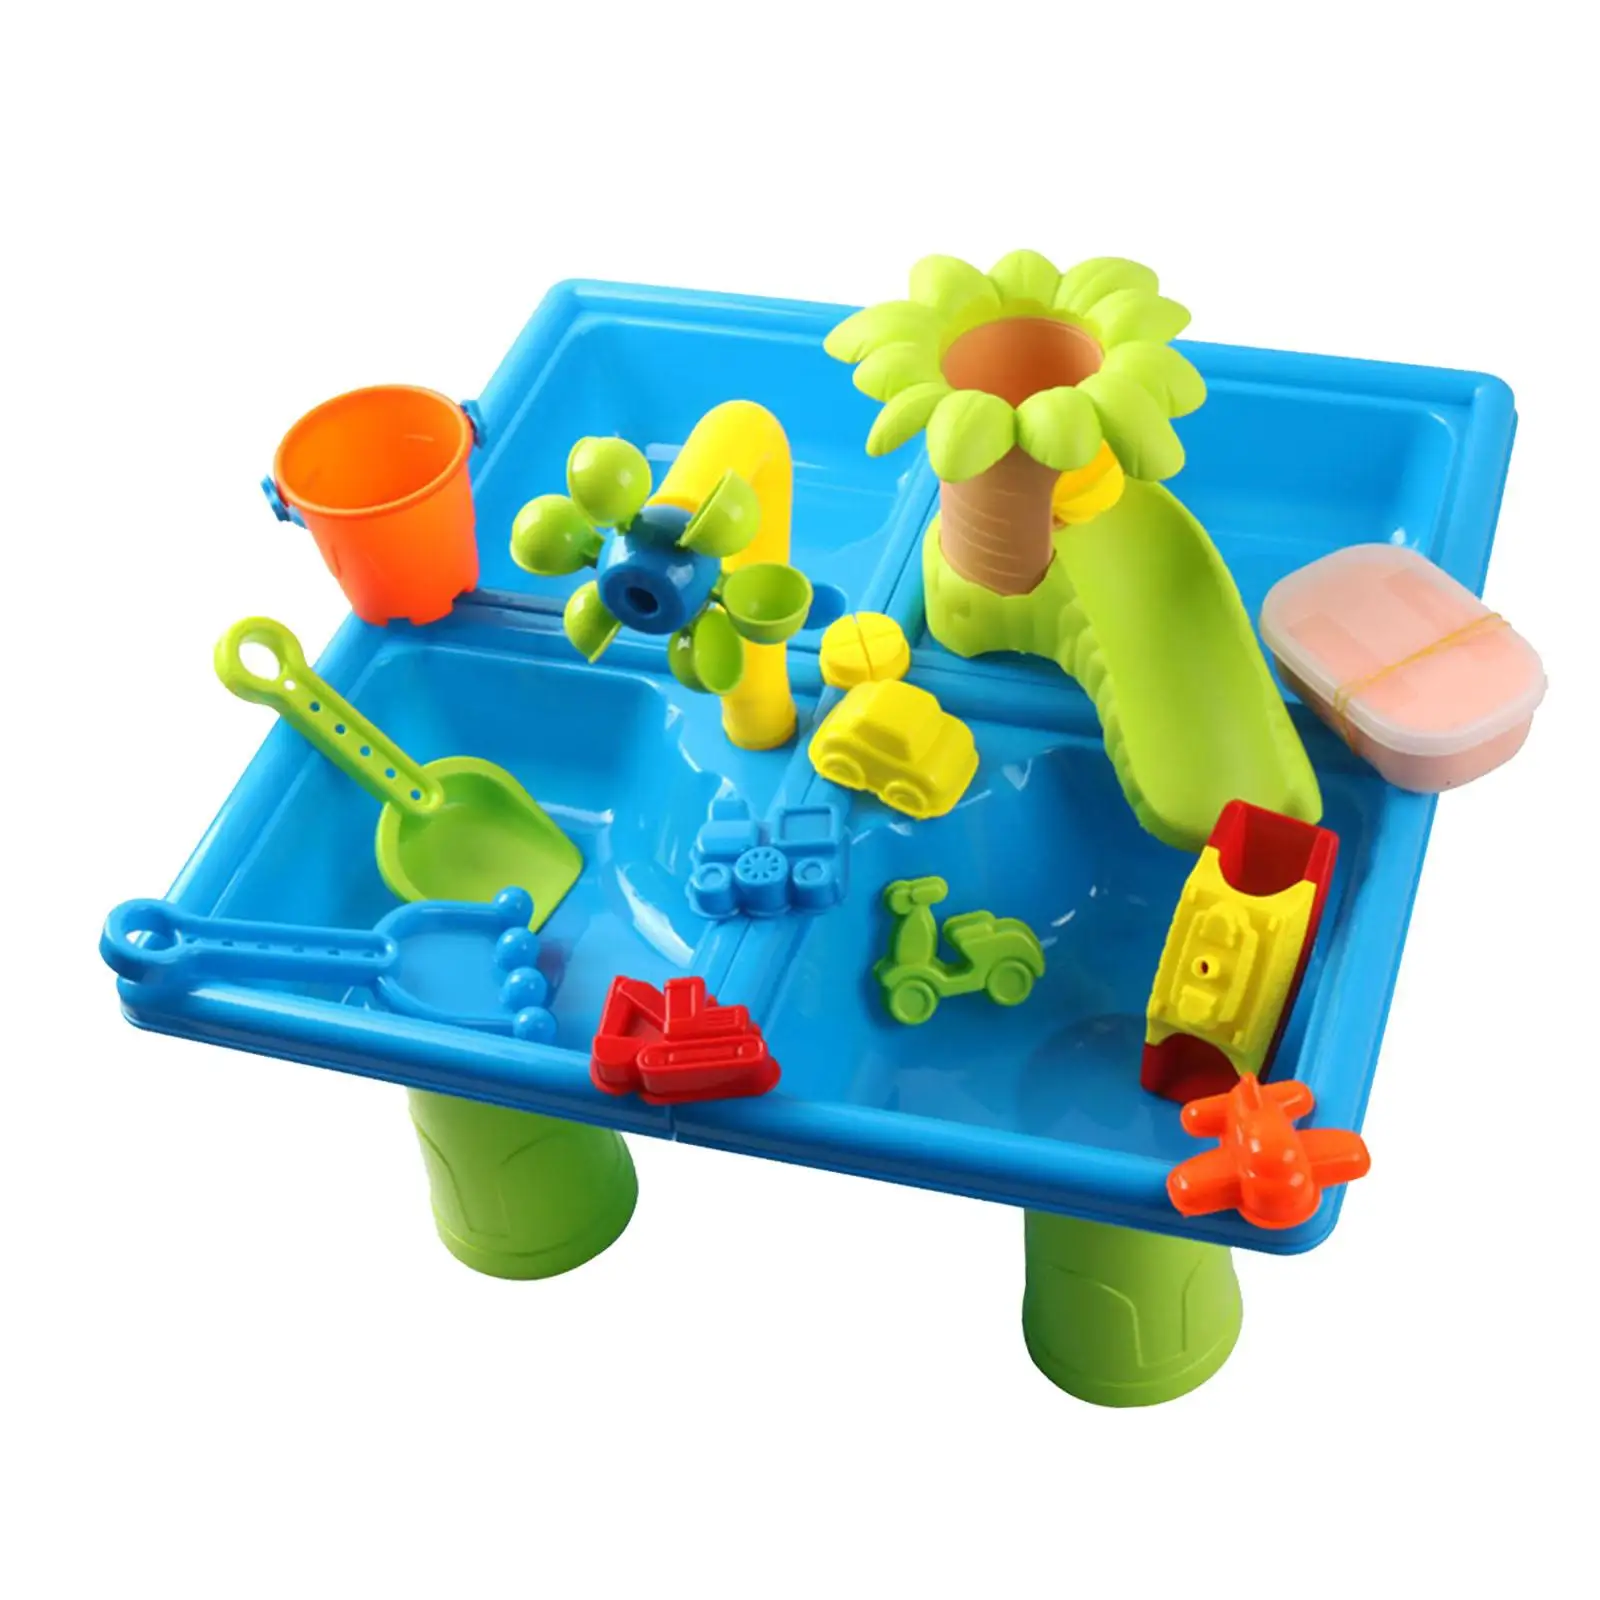 

24Pcs Sand Water Table Toys Multifunctional Age 1-3 Girls Boys Sensory Activity Tables for Beach Summer Backyard Outside Outdoor